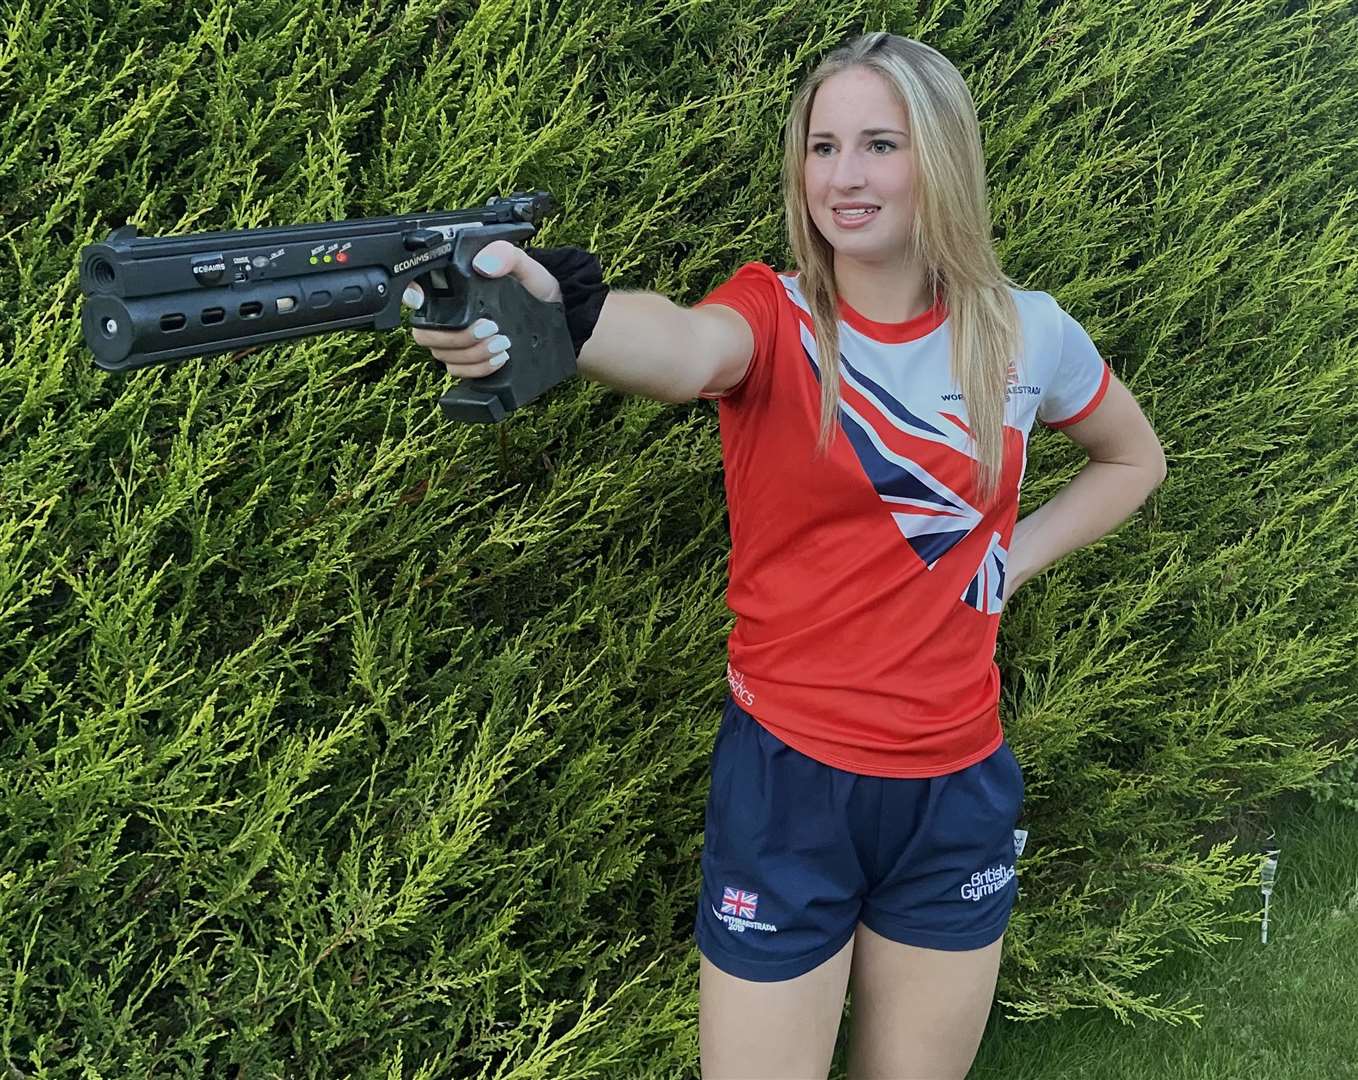 Grace MacDonald is competing in Laser Run at the 2021 School Games in Loughborough